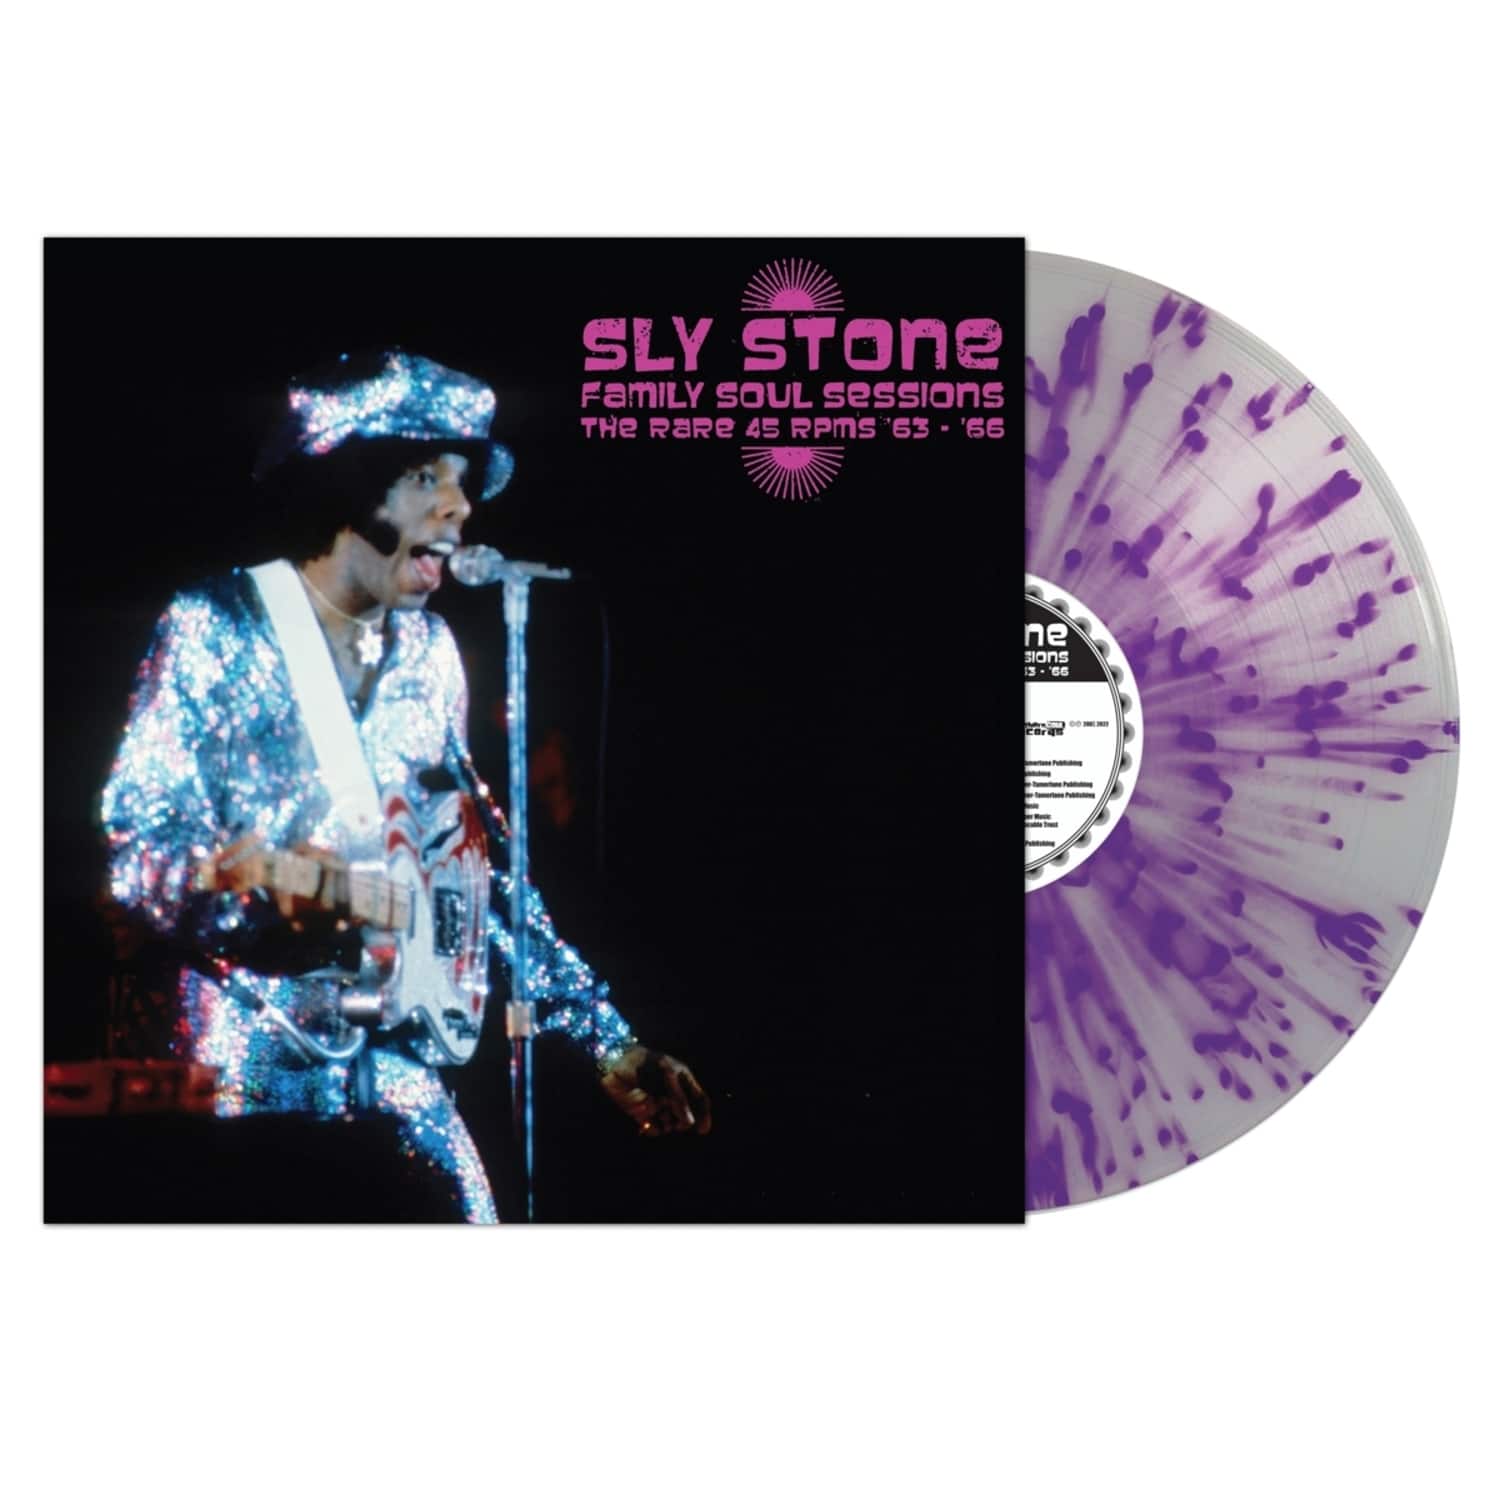 Sly Stone - FAMILY SOUL SESSIONS 